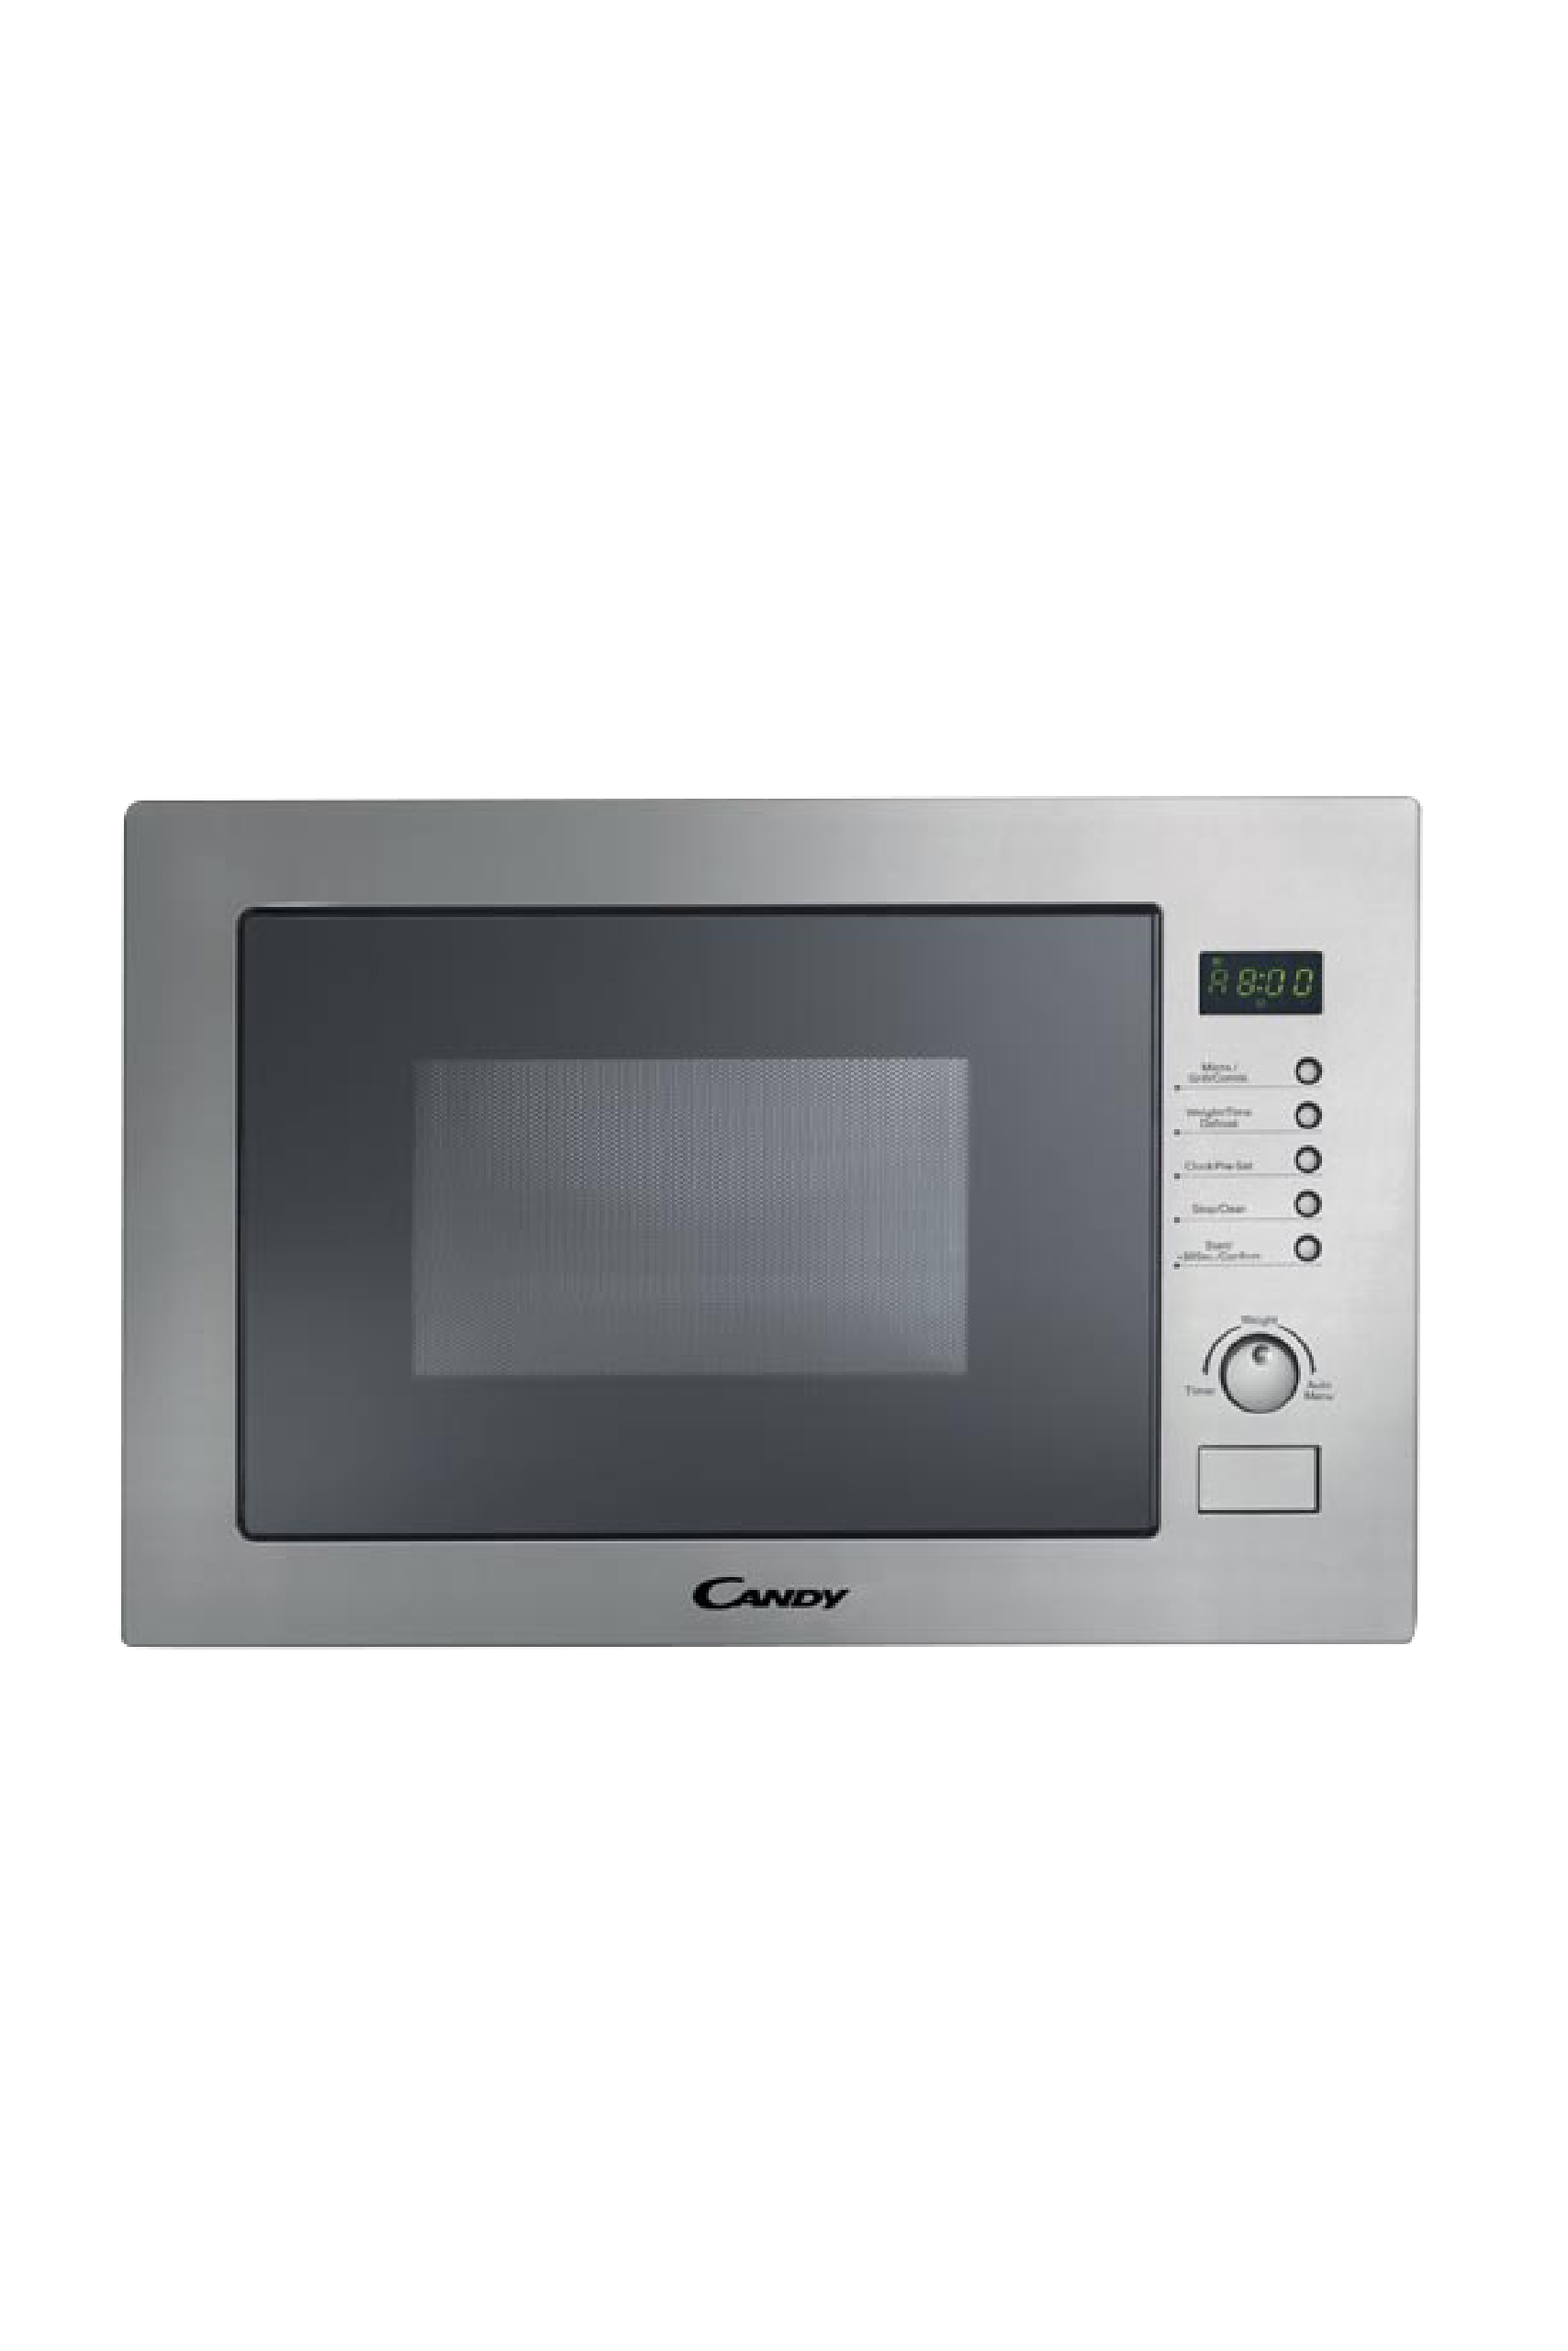 GORENJE Built in Compact Microwave with Grill 60 cm.